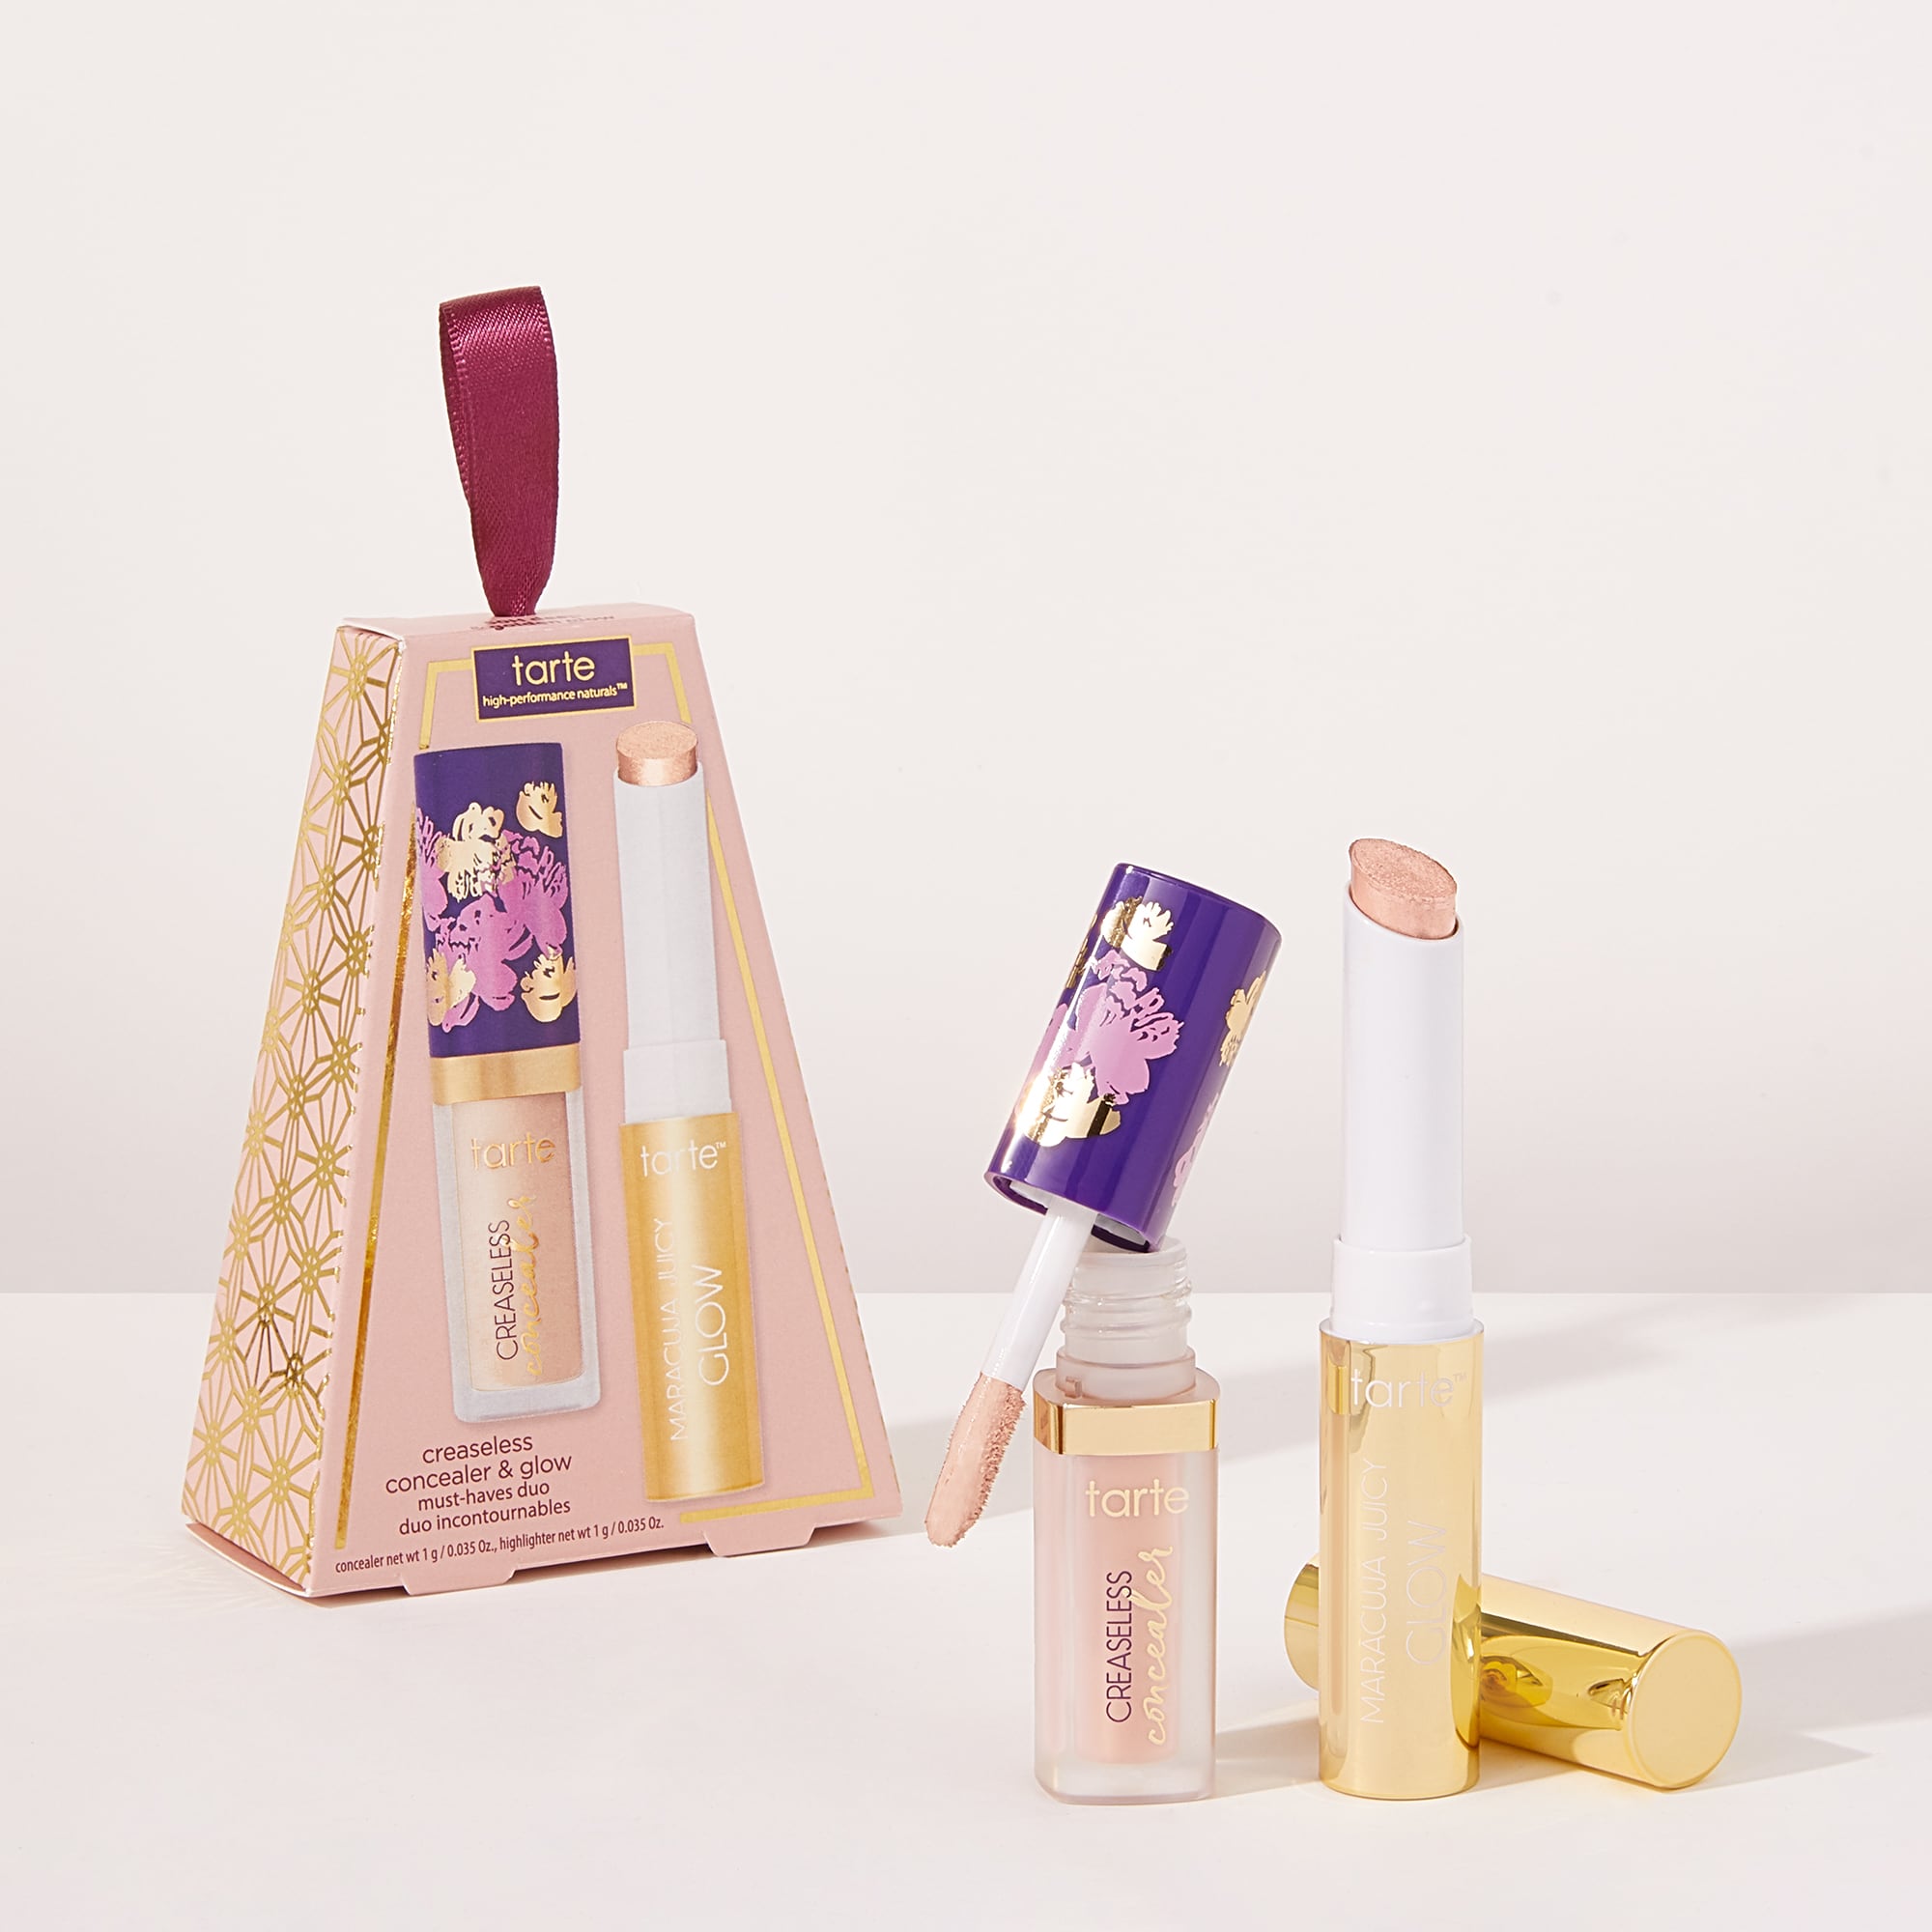 Tarte Cosmetics Creaseless Concealer & Glow Must-haves Duo In White